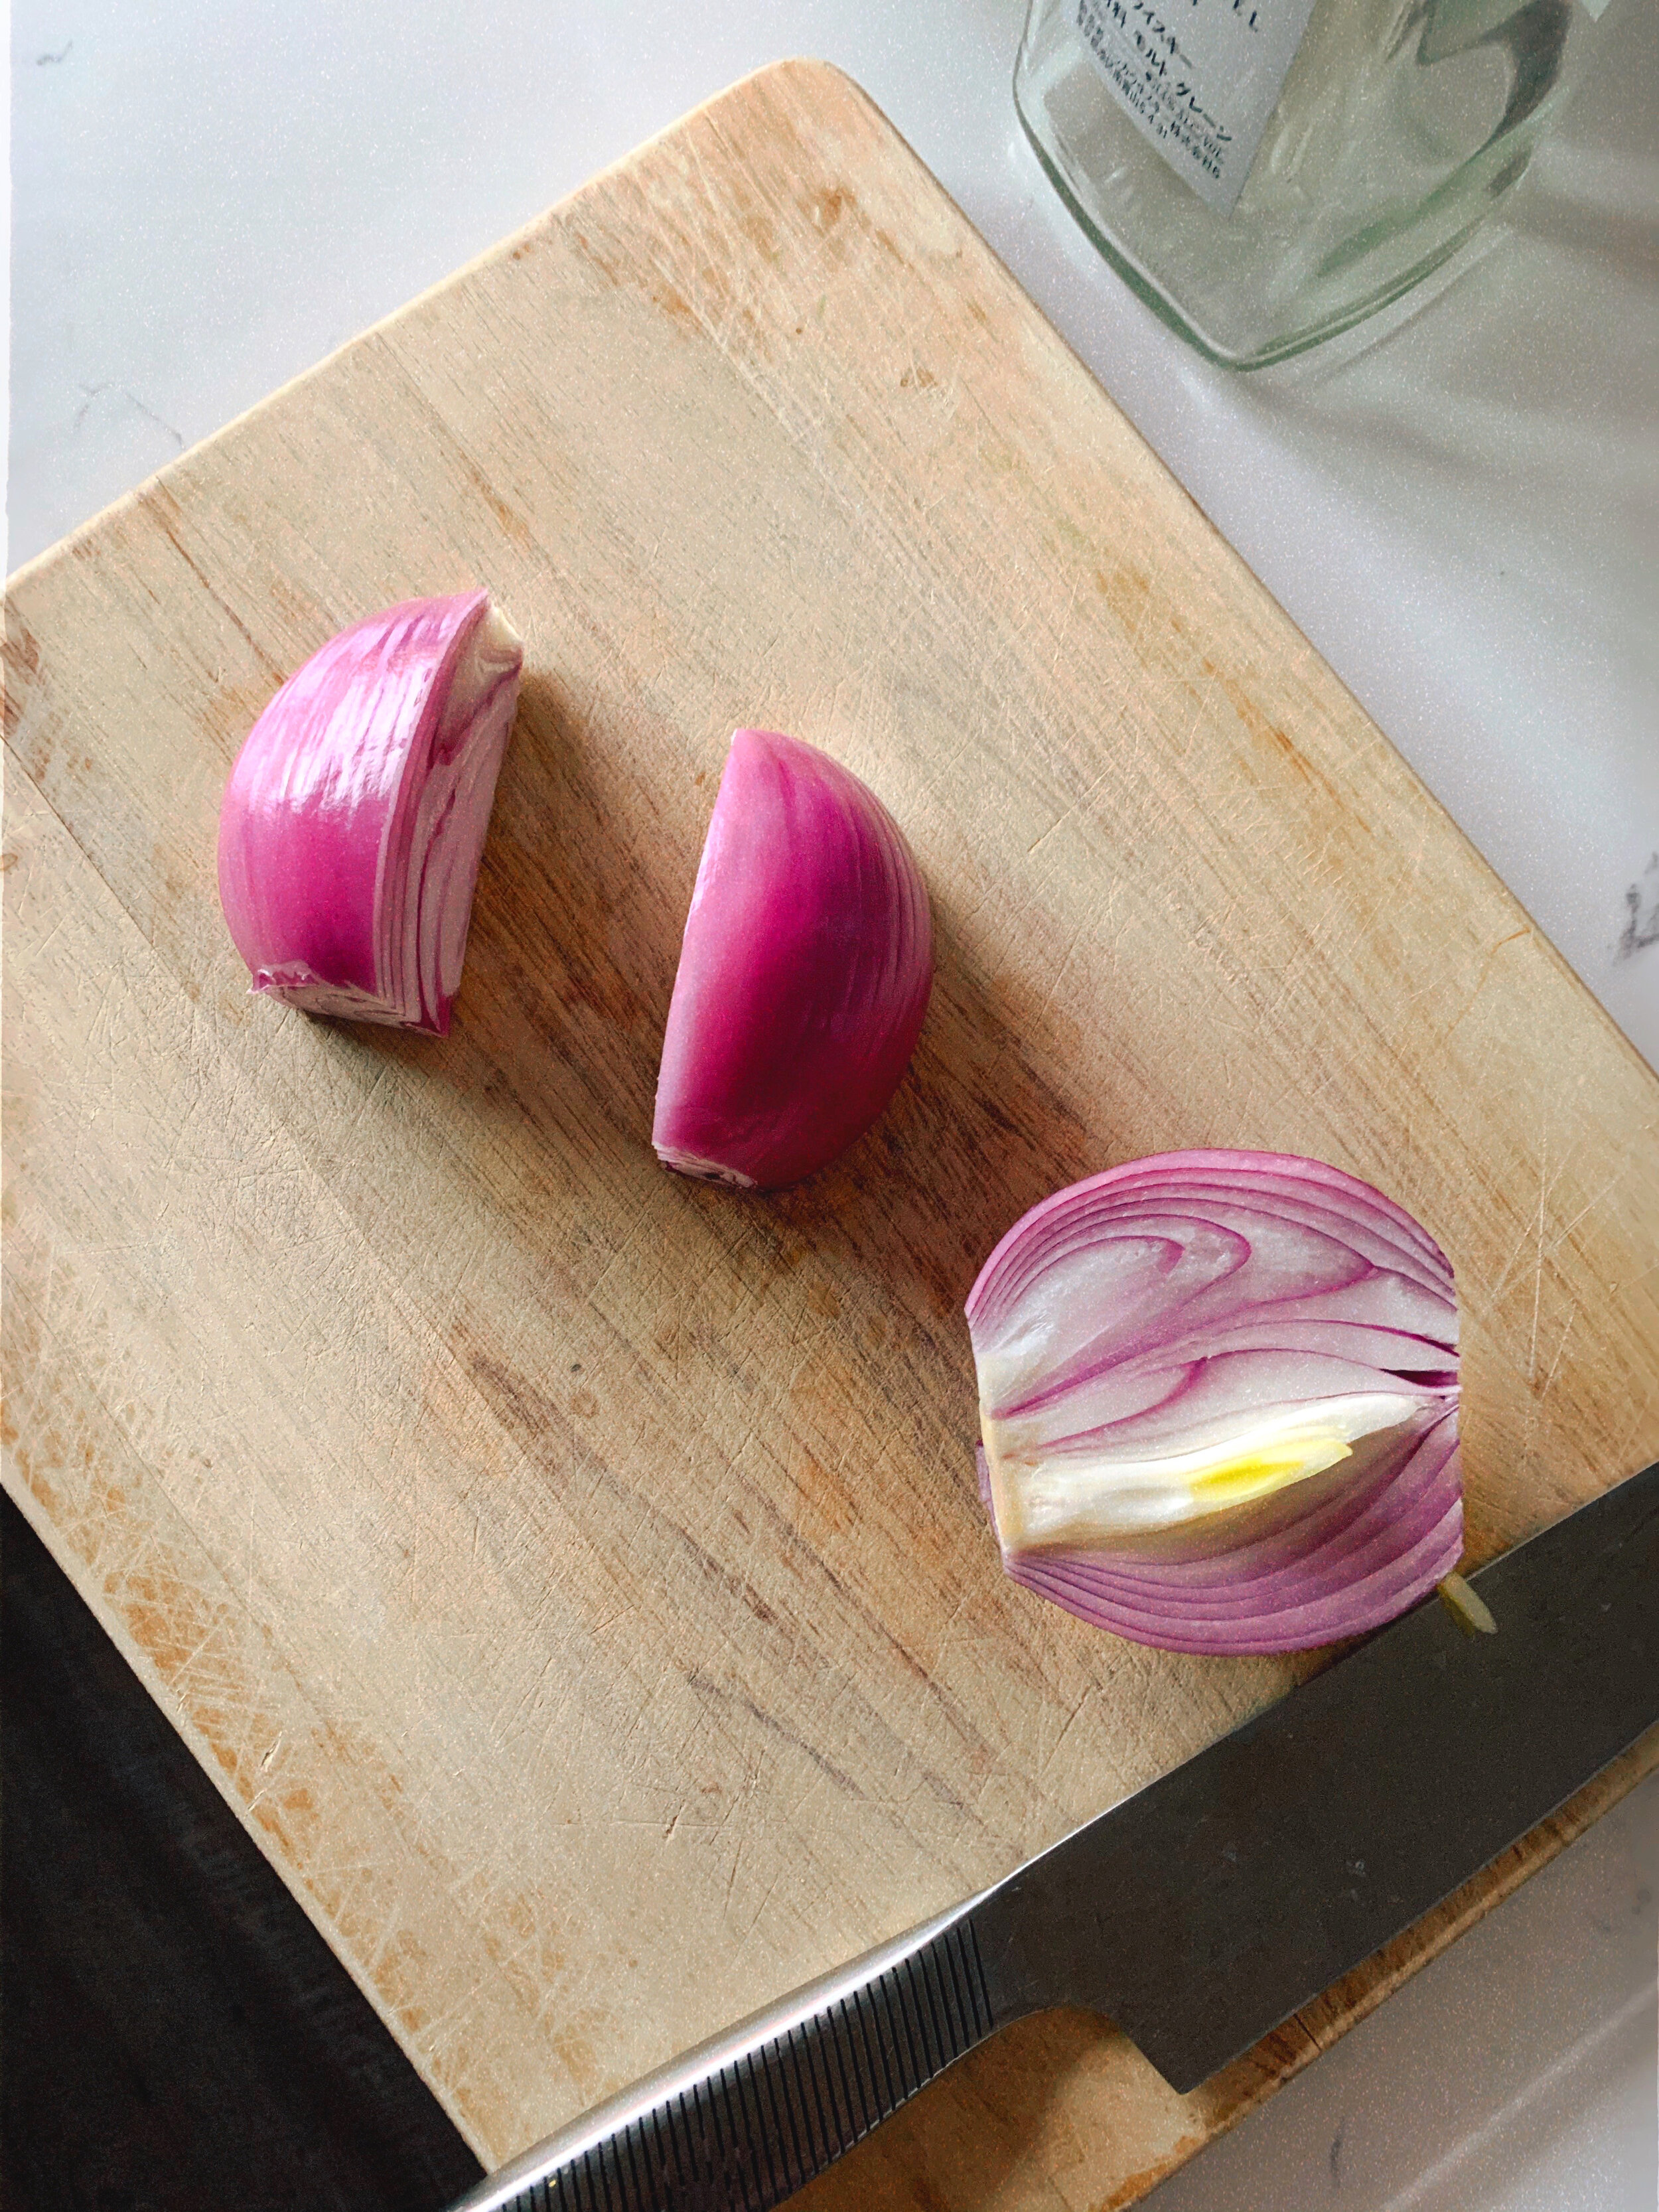 Preparing pickled red onions by quartering the red onion